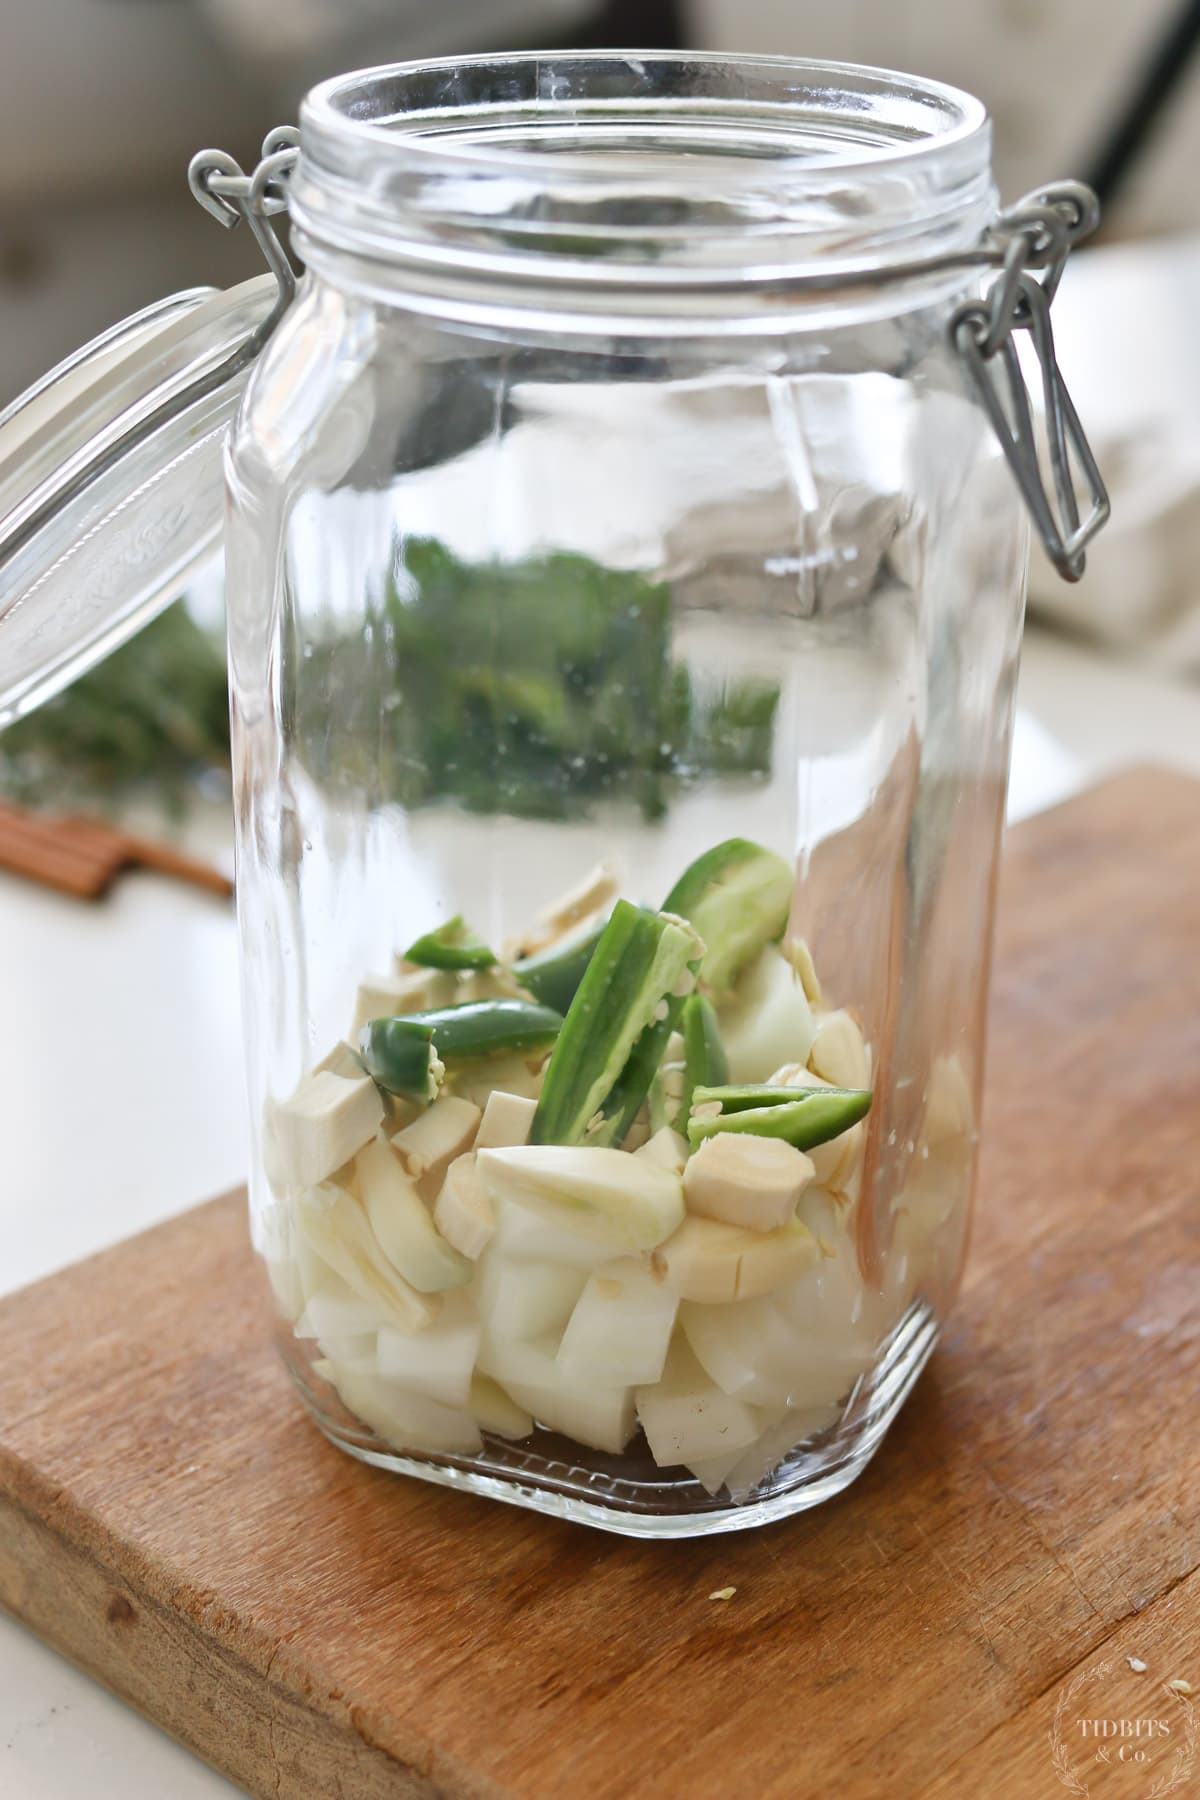 A glass jar layered with onions, garlic and peppers